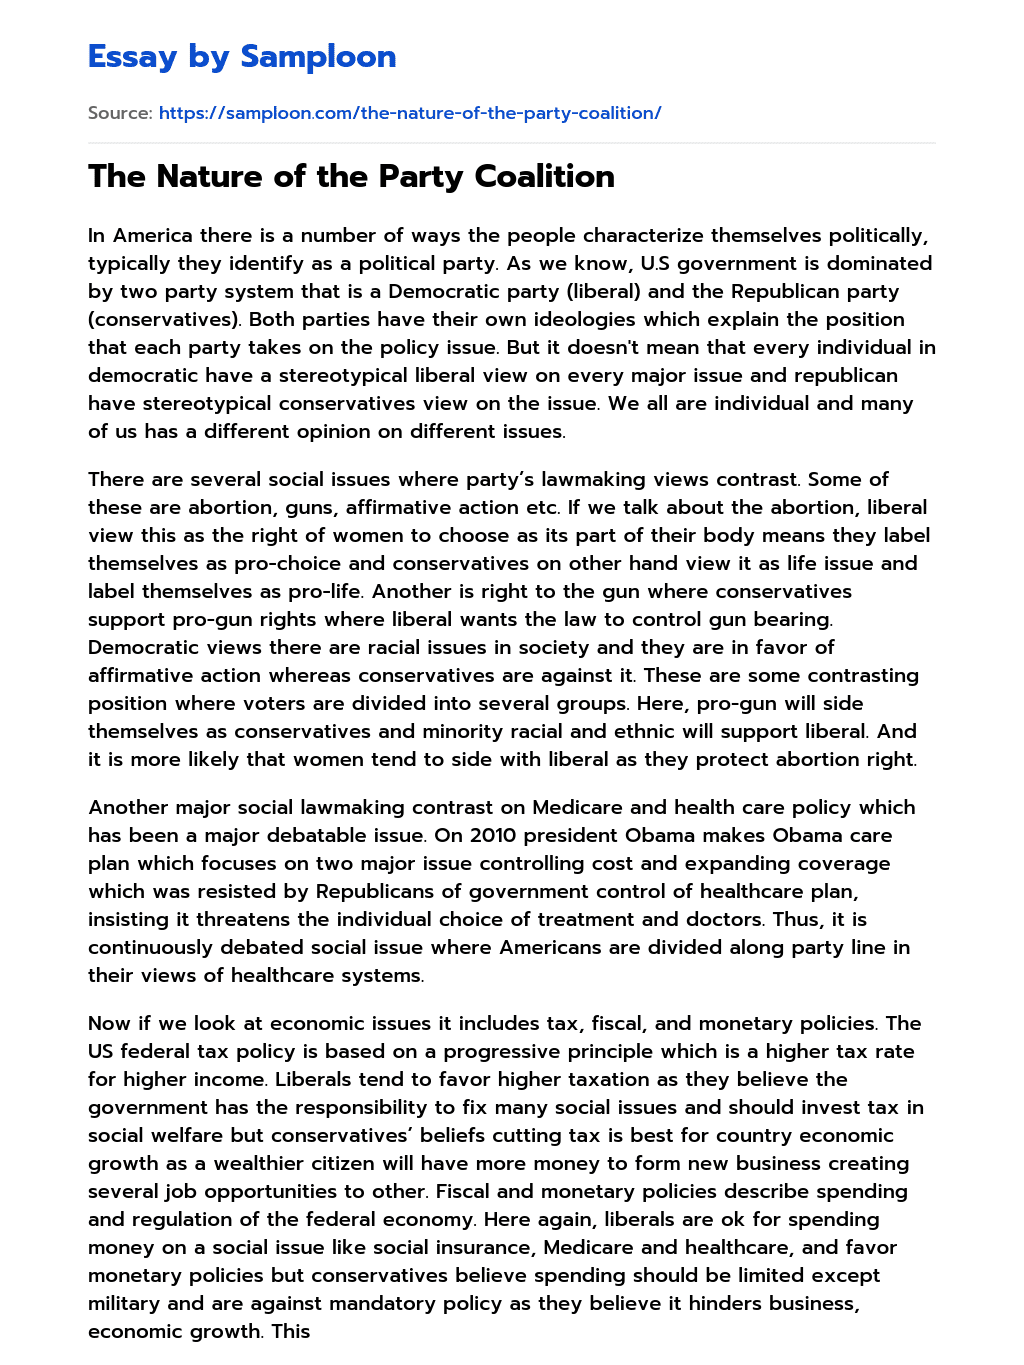 The Nature of the Party Coalition essay